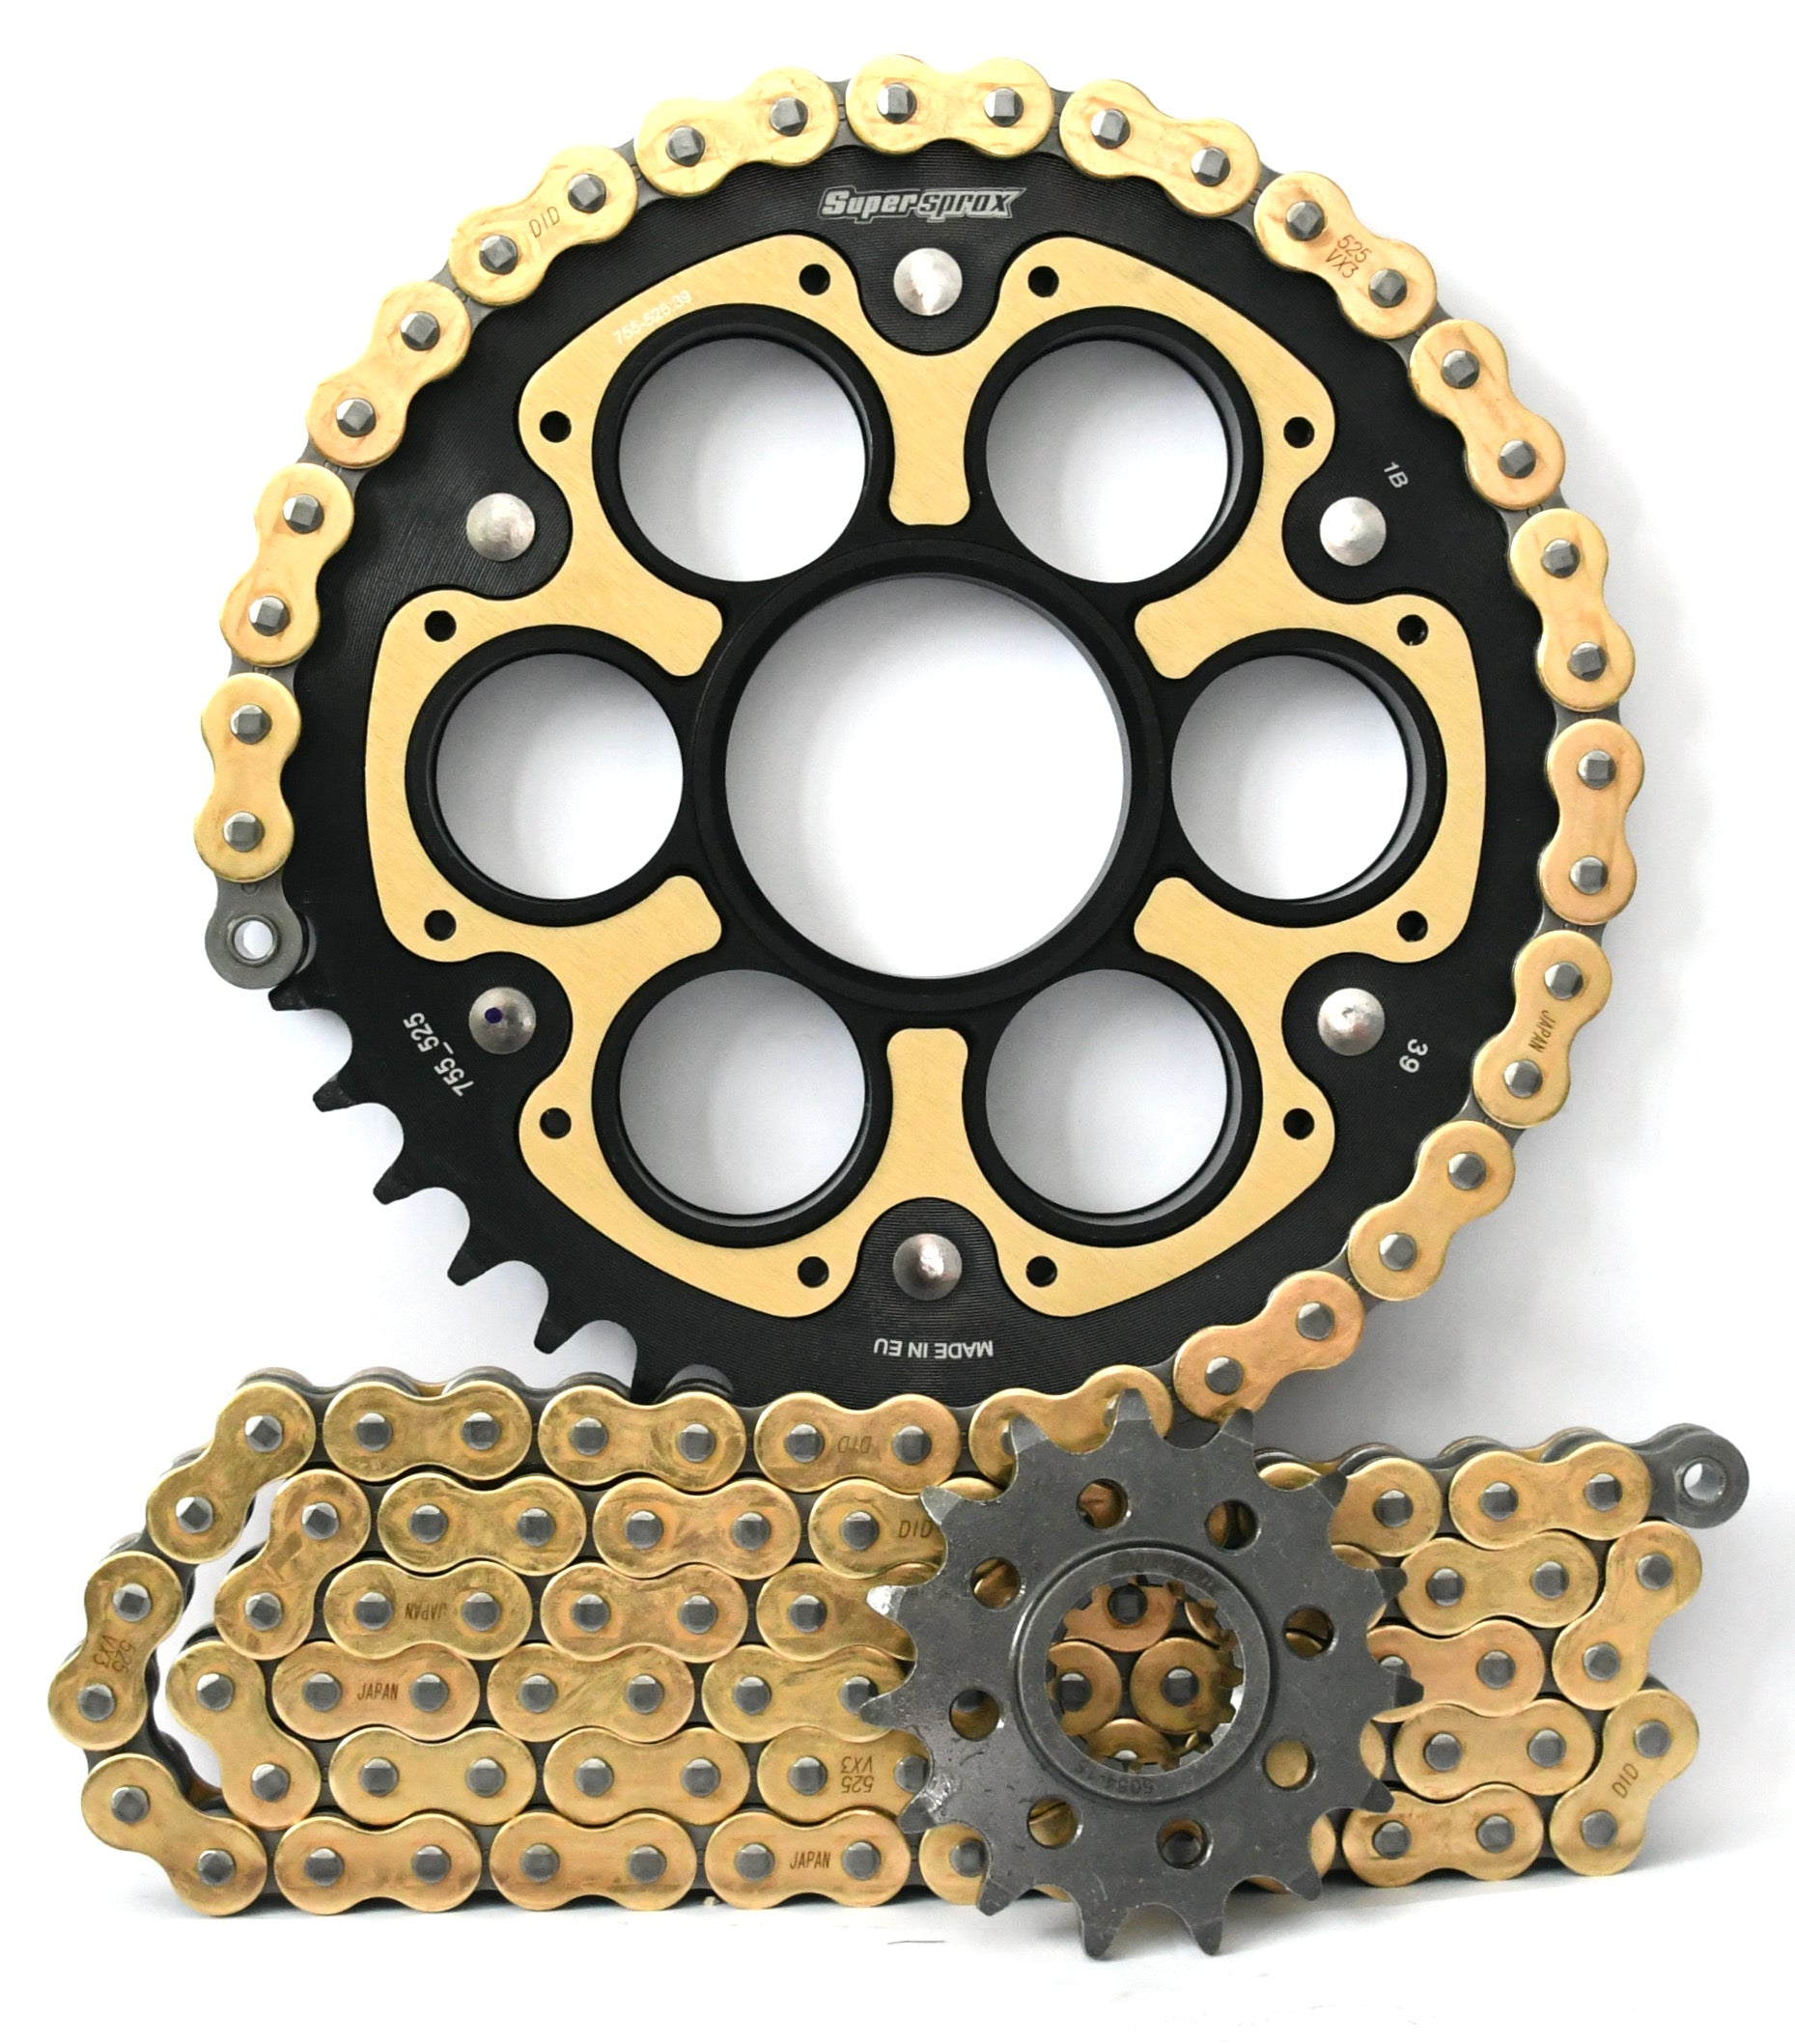 Supersprox Chain & Sprocket Kit for Ducati Panigale 1199R - Standard Gearing - 0